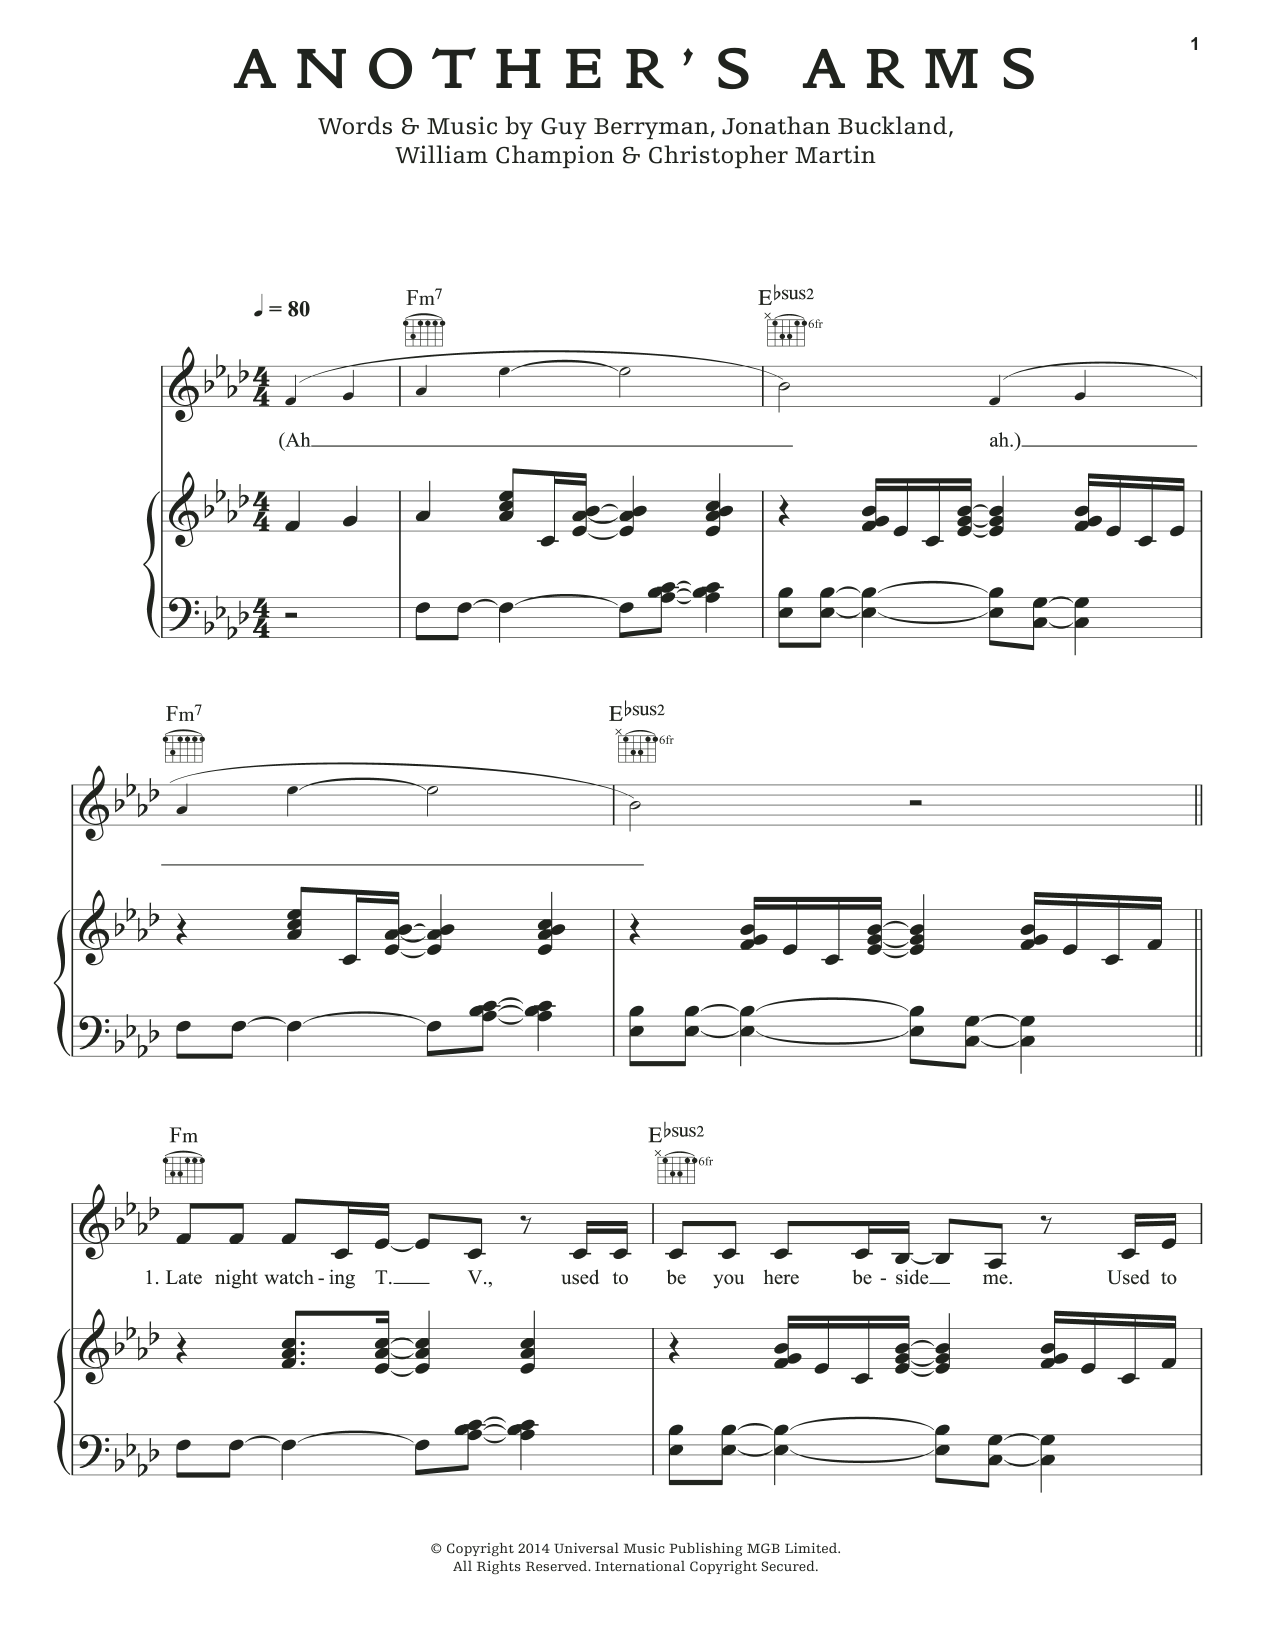 Download Coldplay Another's Arms Sheet Music